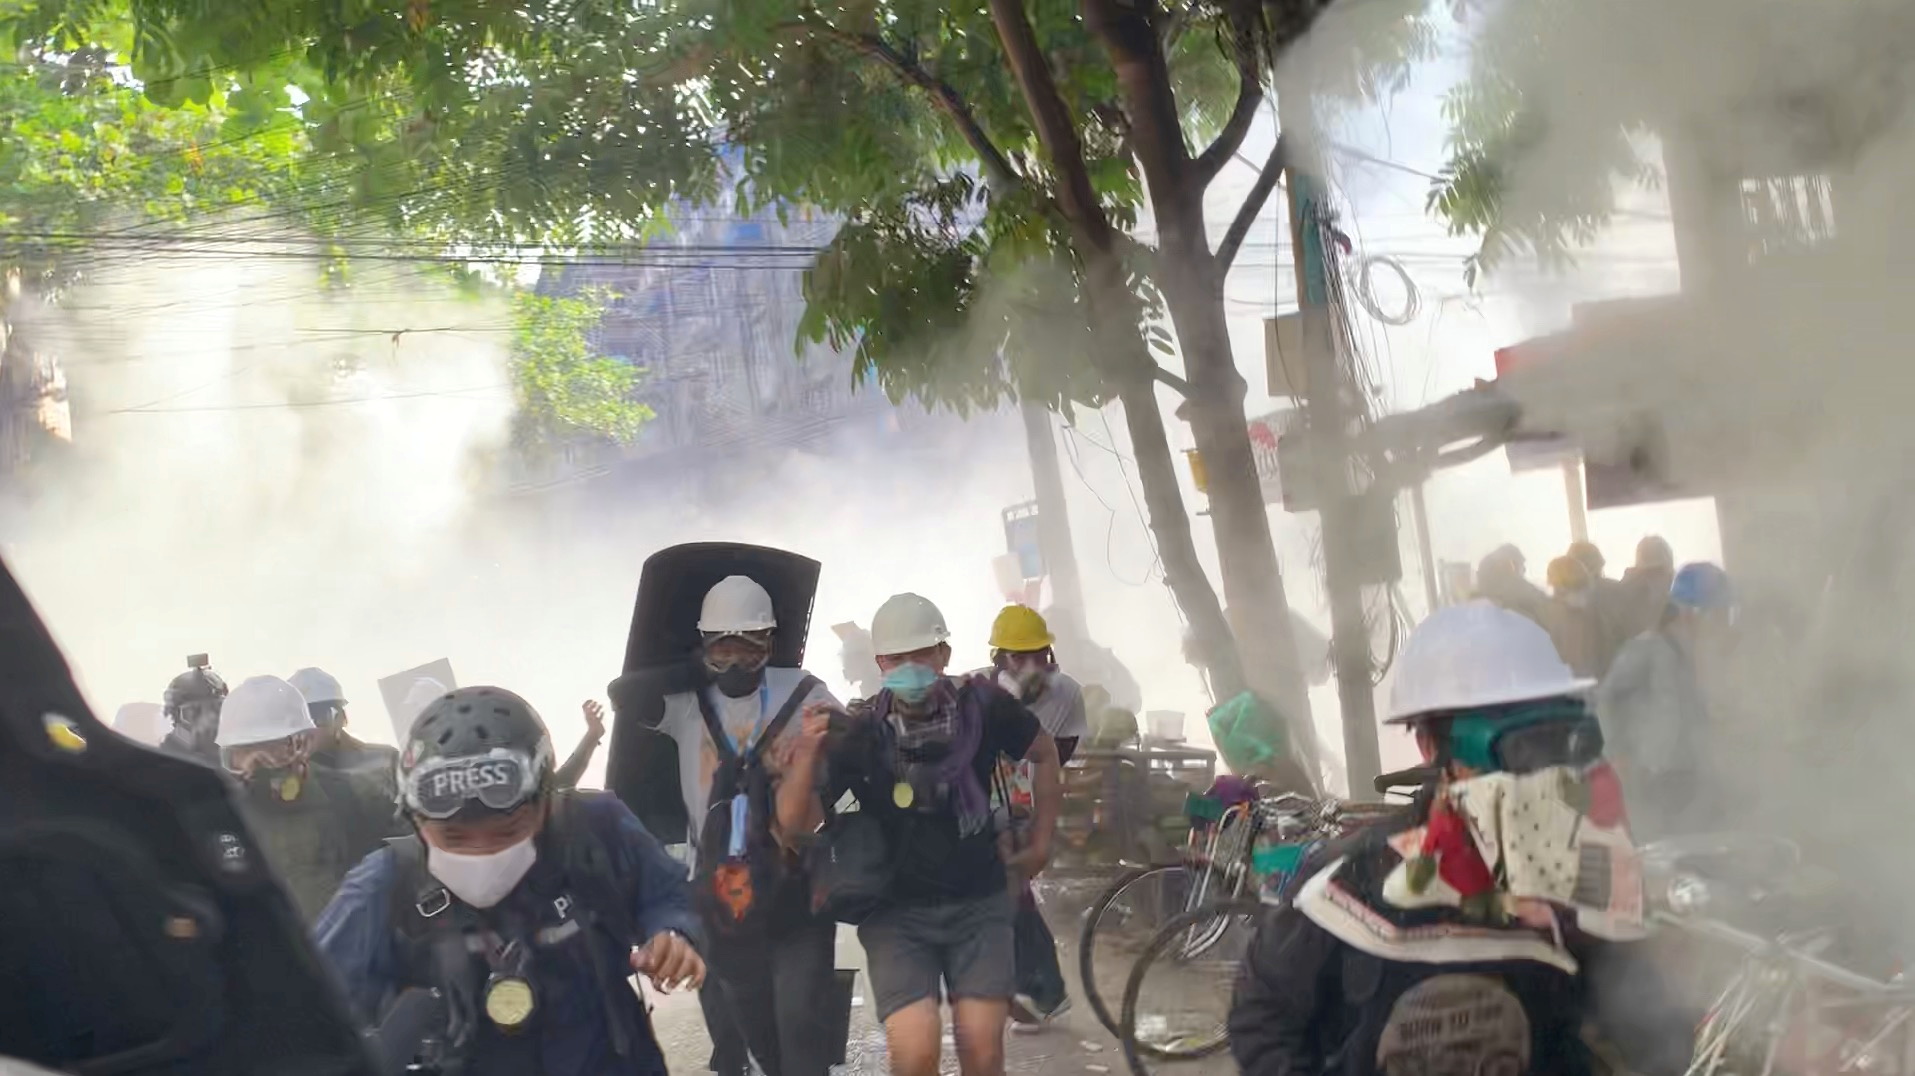 Video grab of protesters setting off smoke grenades to block the view from snipers in Sanchaung, Yangon, Myanmar